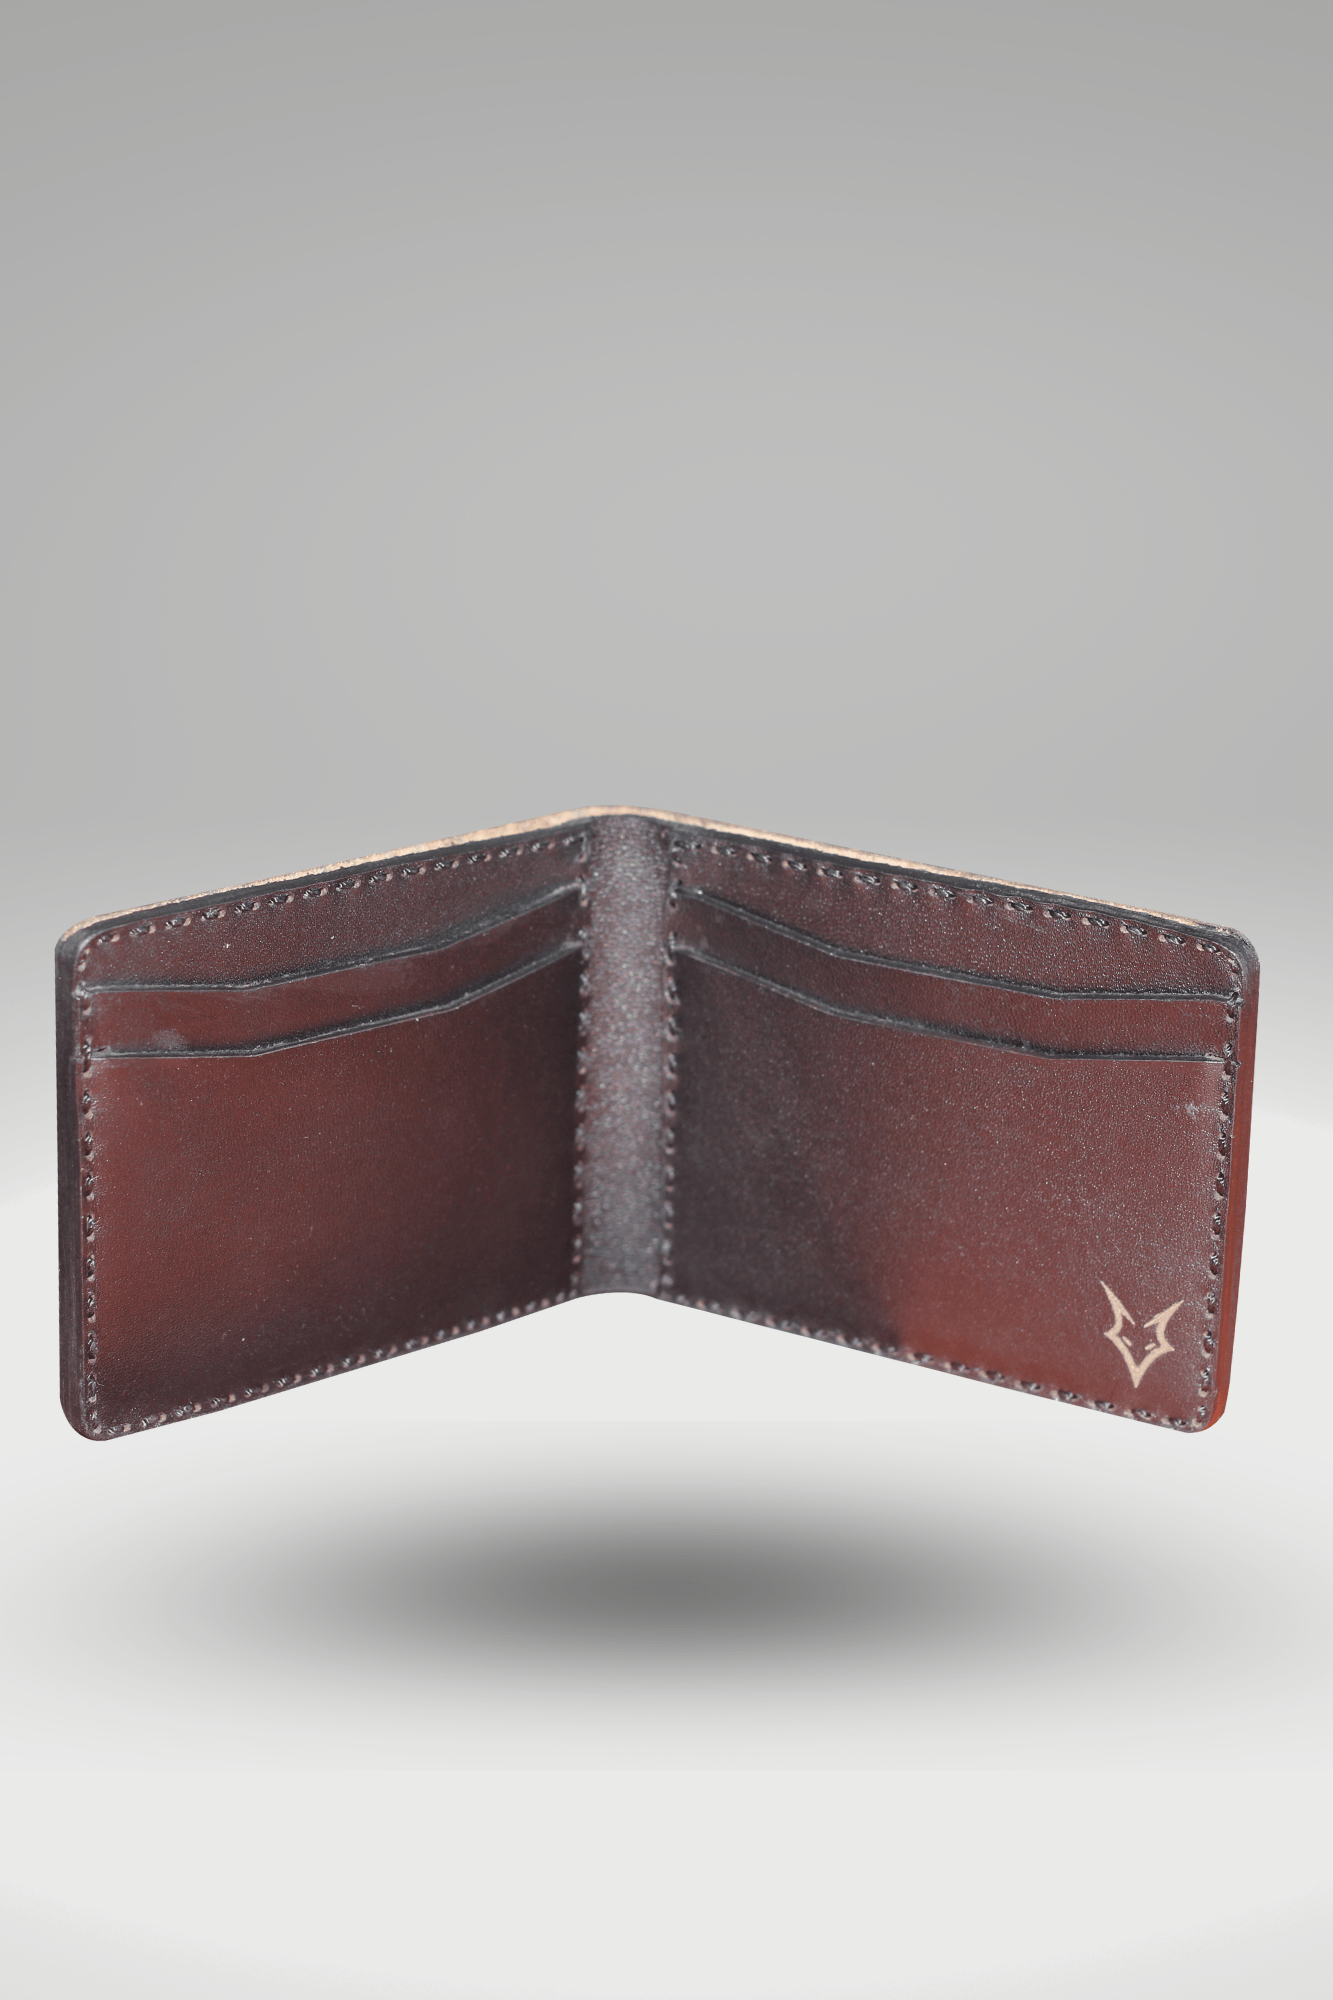 Men's Cubic Crocodile Textured Genuine Cowhide Leather Wallet In Maroon | Bifold Hand-Made Leather Mini Wallet